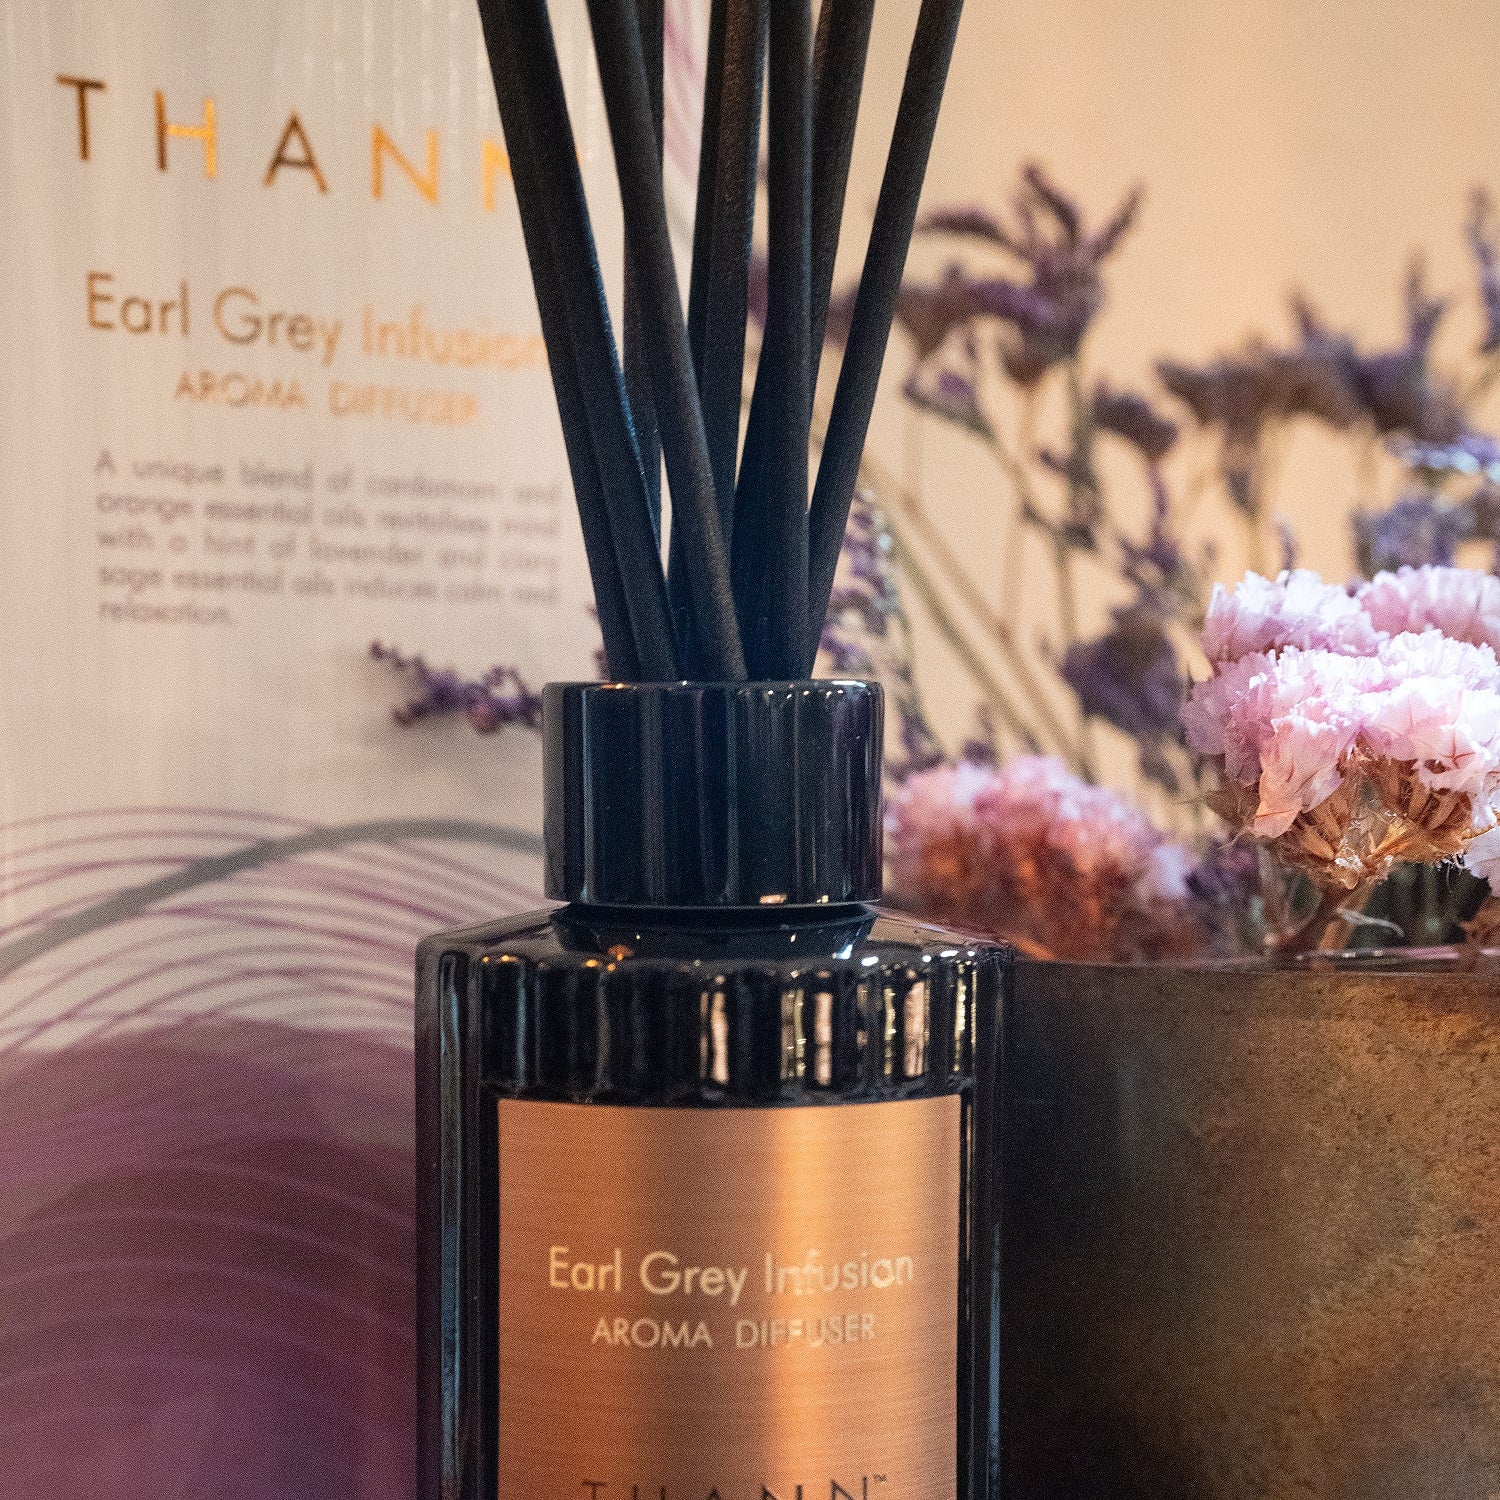 Thann Aroma Diffuser - Earl Grey Infusion